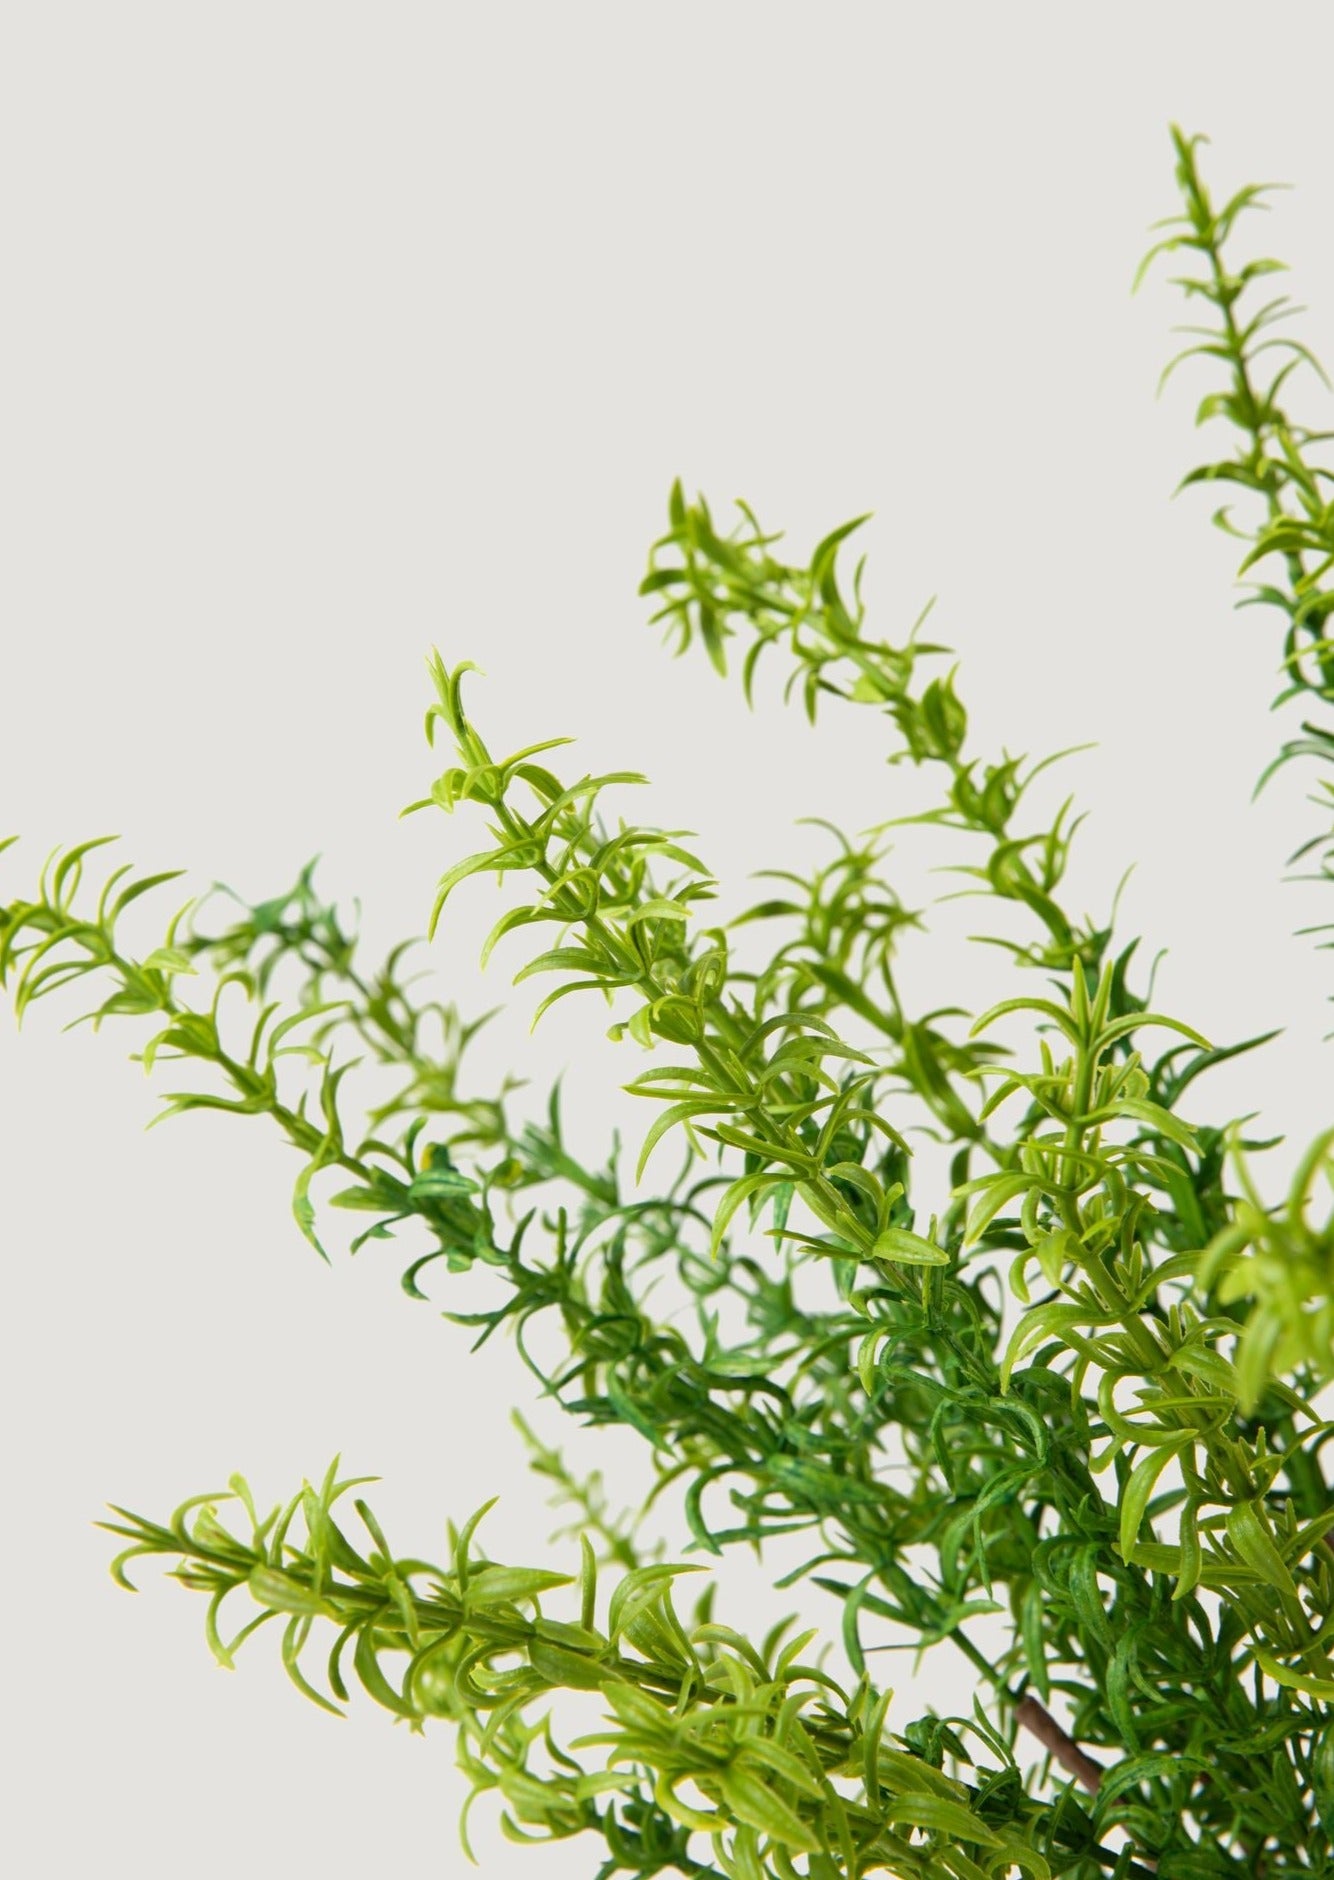 Green Artificial Rosemary Foliage in Closeup View